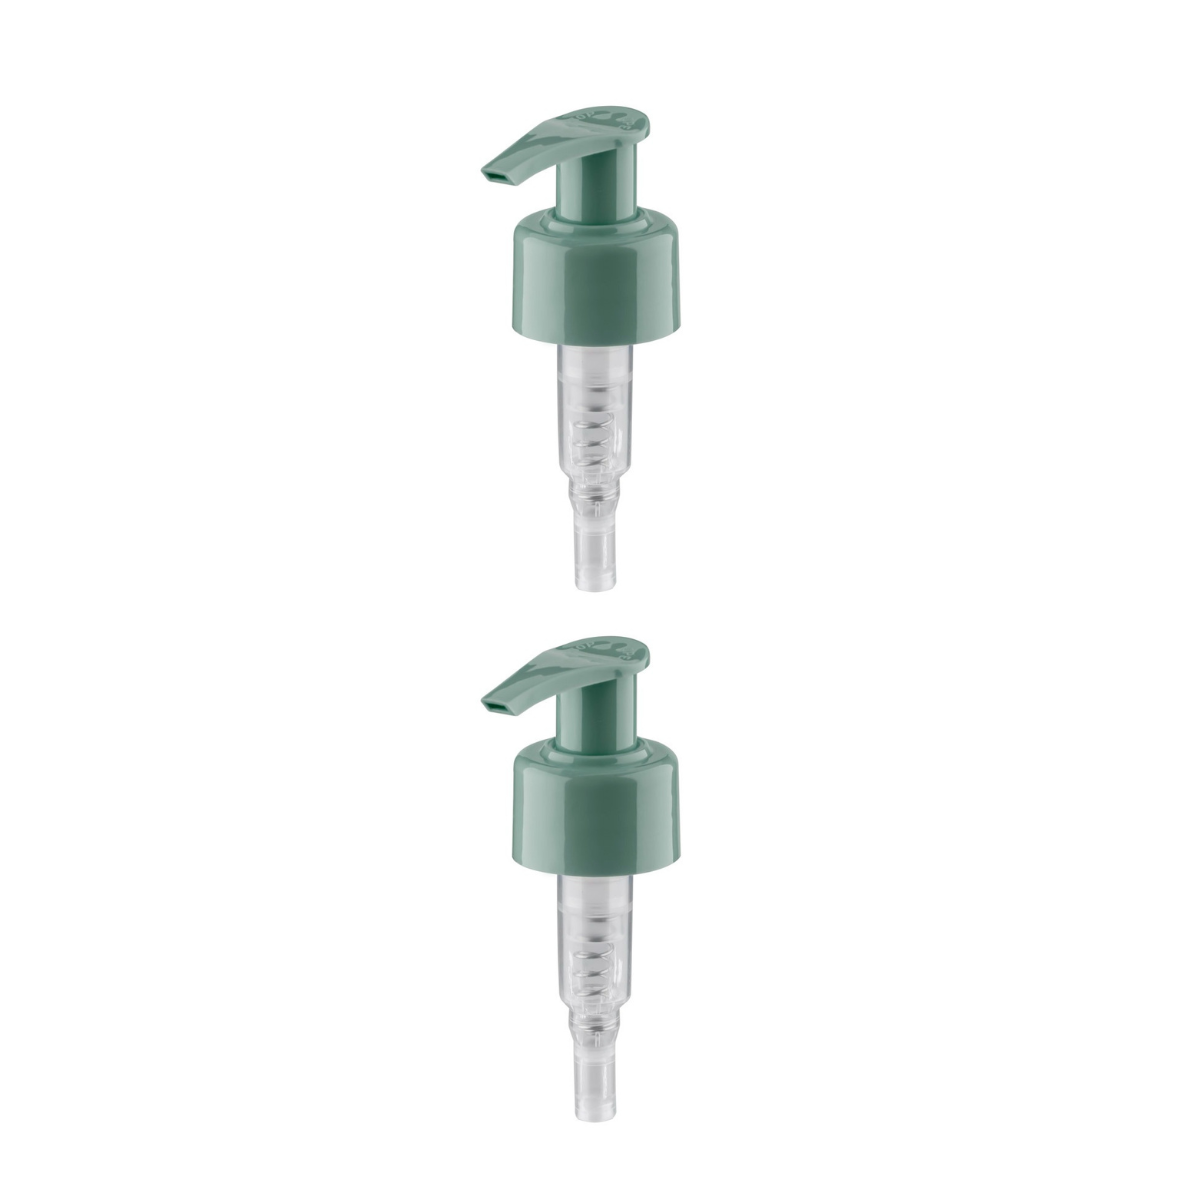 Dompel Pump valves, color green, thread 28/410, made with stainless steel springs and glass balls, Model 303-A1. (Pump heads only, bottles not included) - depilcompany